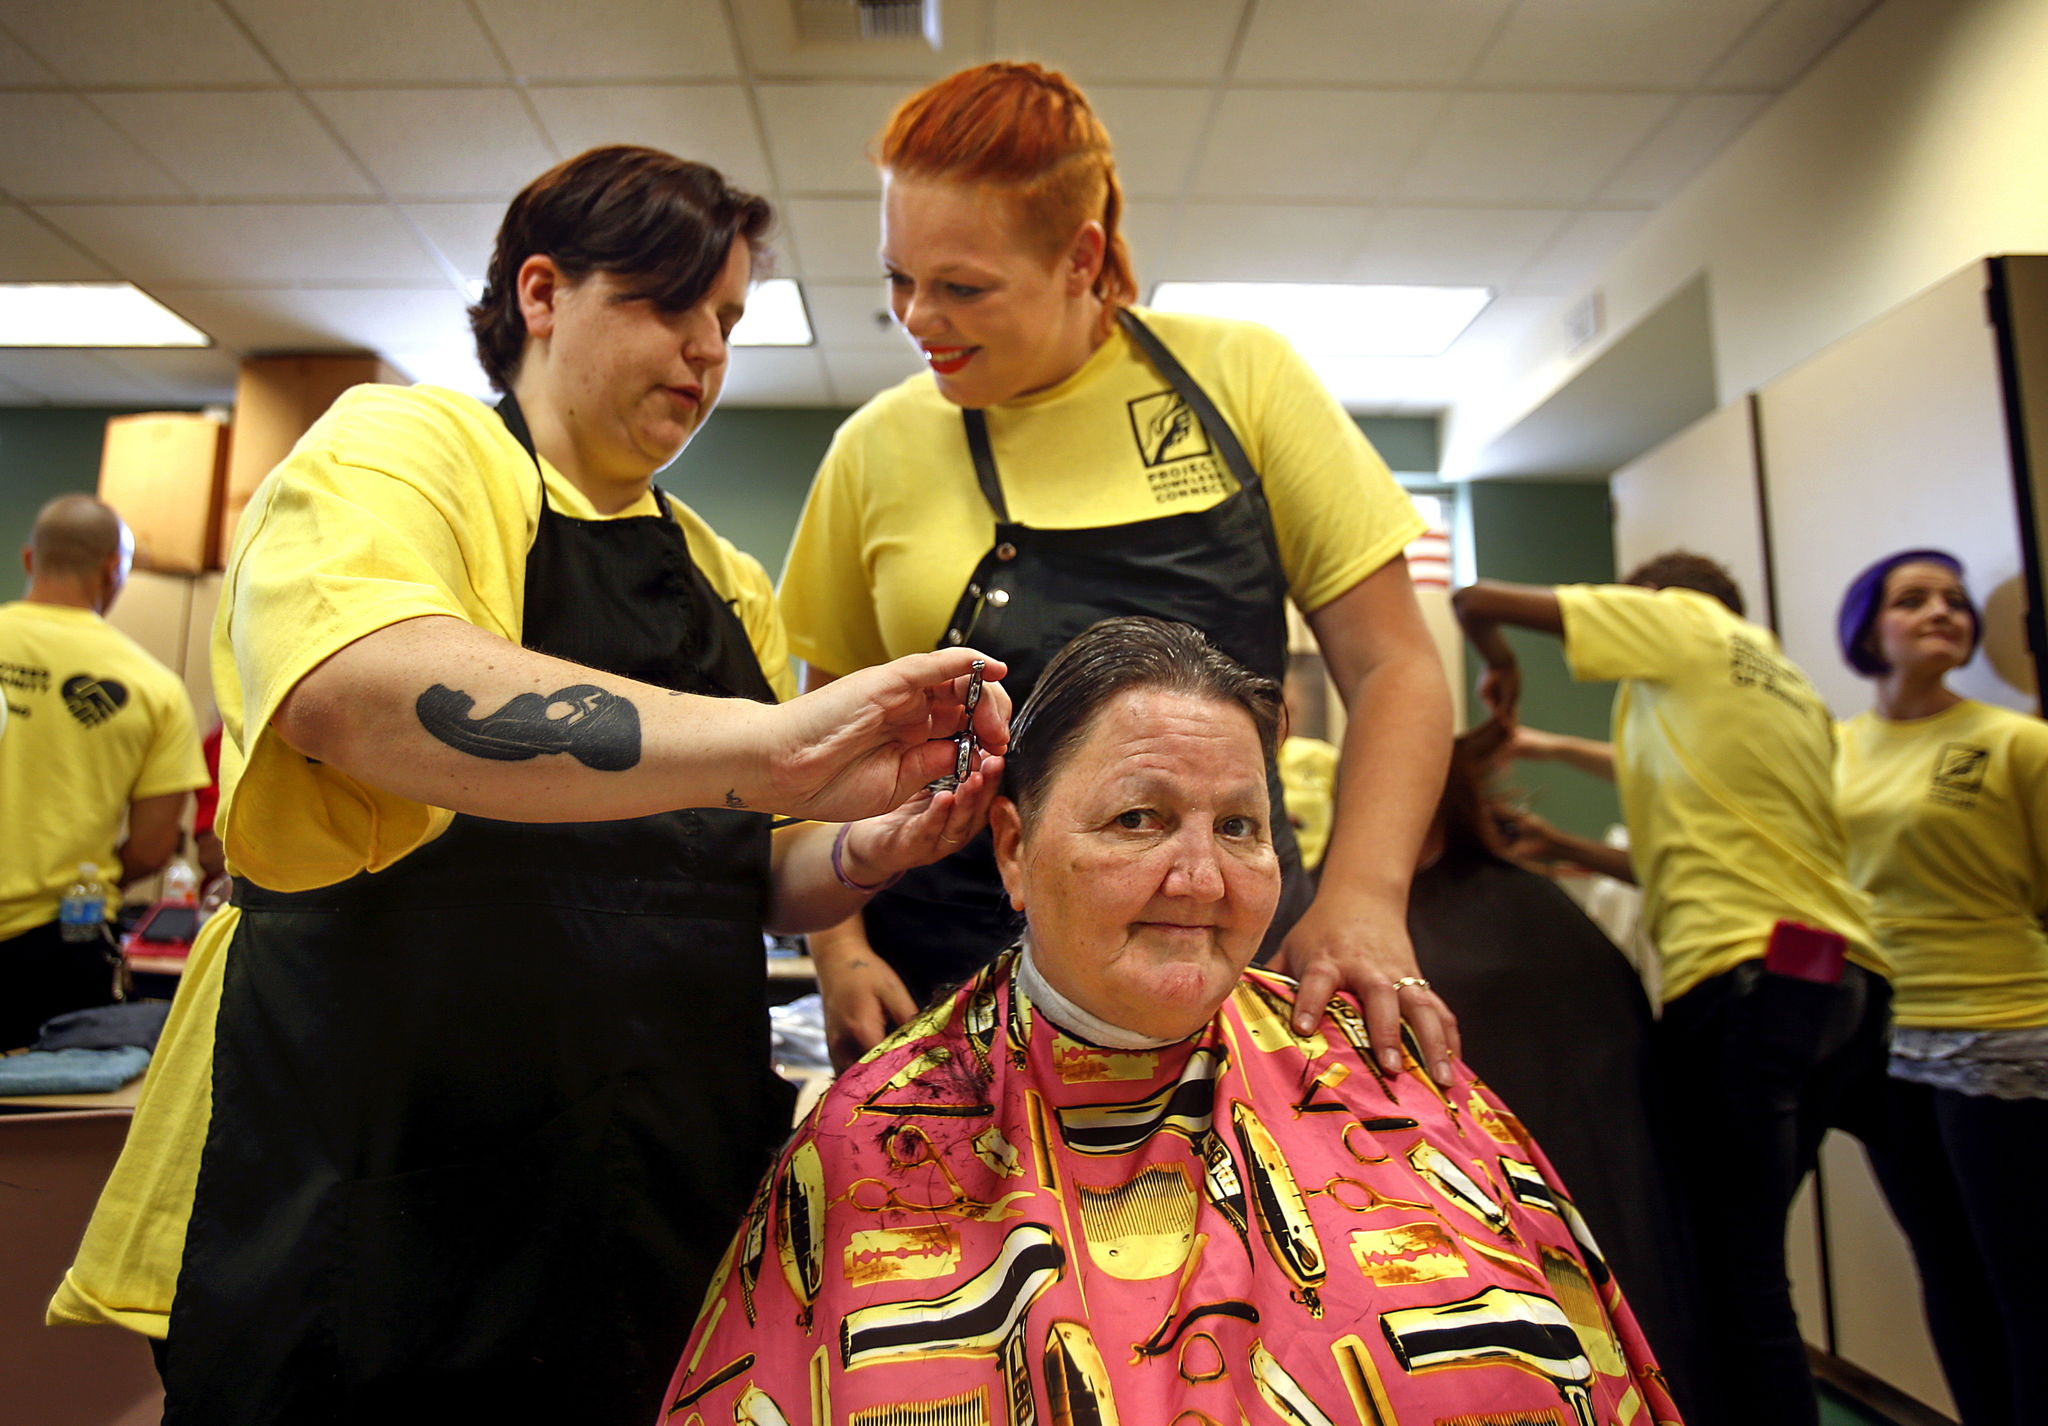 Licensed cosmetologist Kristina Kole (left) and her spouse, cosmetology student Brandy Kole, team up to give Gold Bar’s Cindy Lien a haircut at last year’s Project Homeless Connect. They were volunteers from Paroba College of Cosmetology. Paroba students and staff will be back to help at this year’s event, scheduled for July 14 at Everett High School.